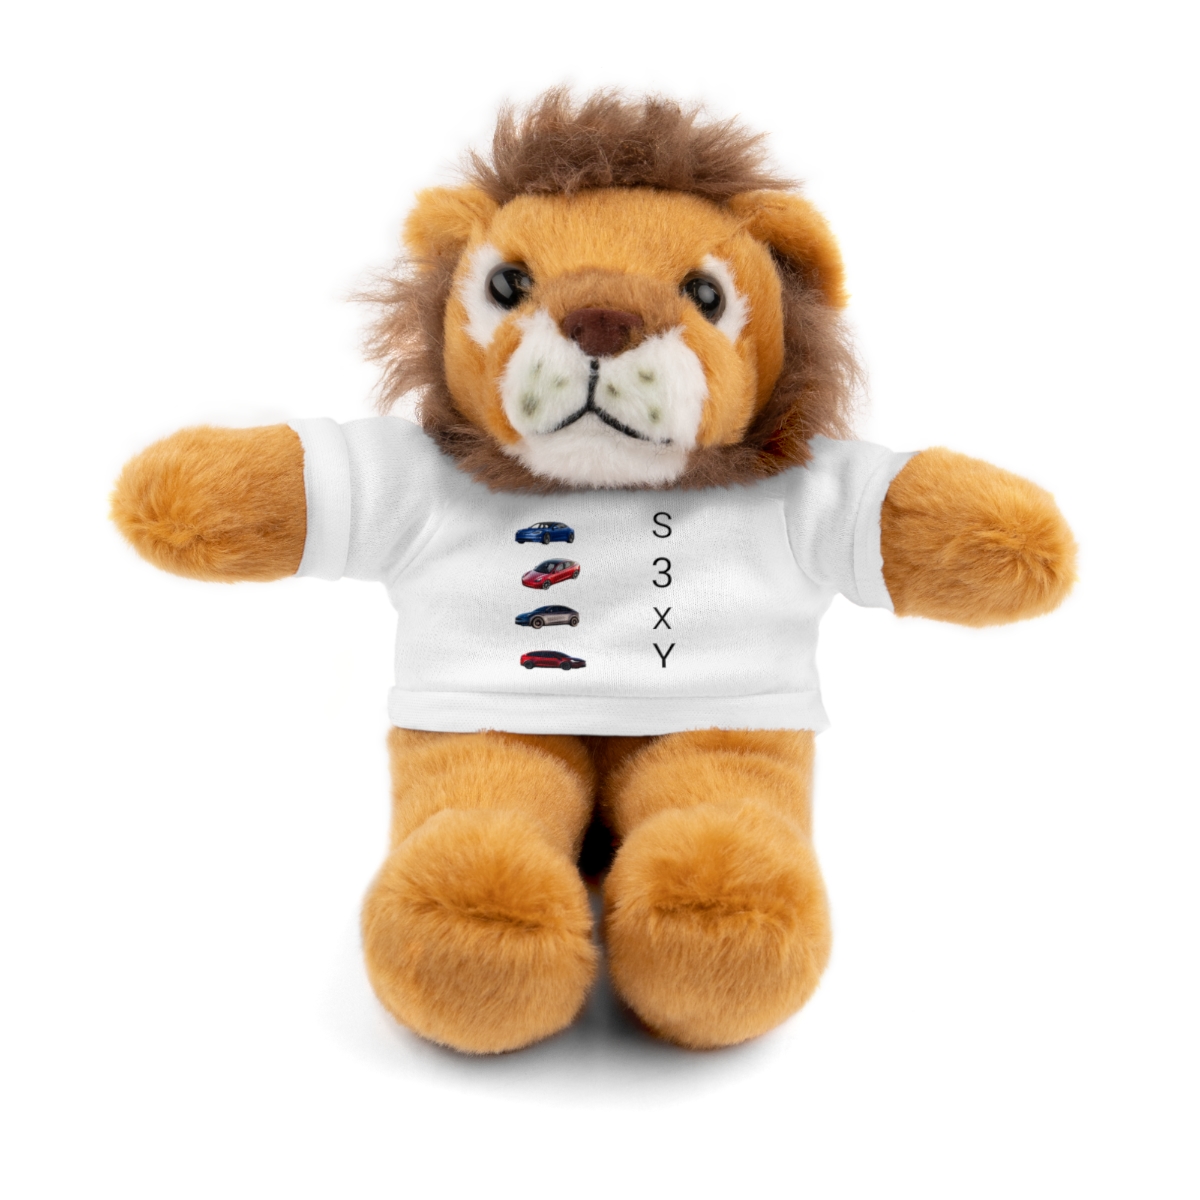 The S.3.X.Y Stuffed Animals with Tee product main image